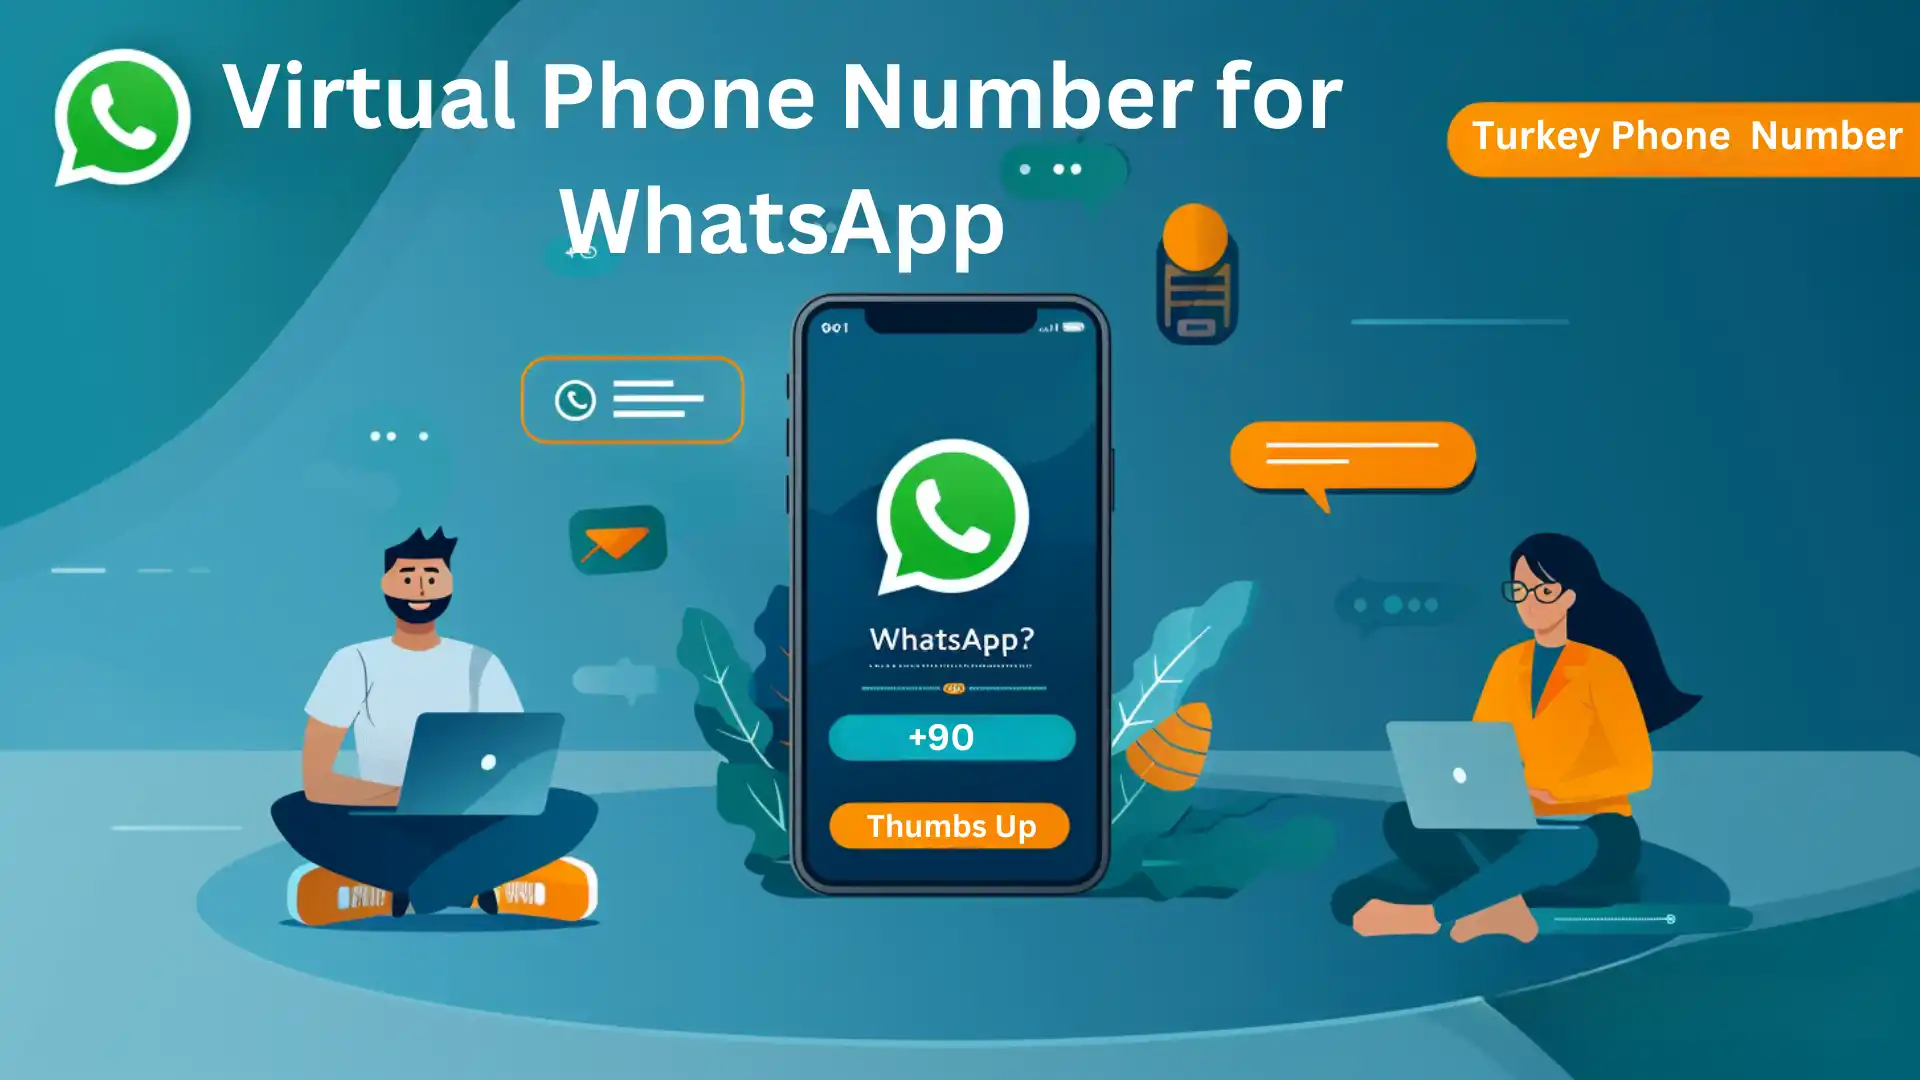 Why Use a Free Turkey Number for WhatsApp Virtual Phone Number for WhatsApp?